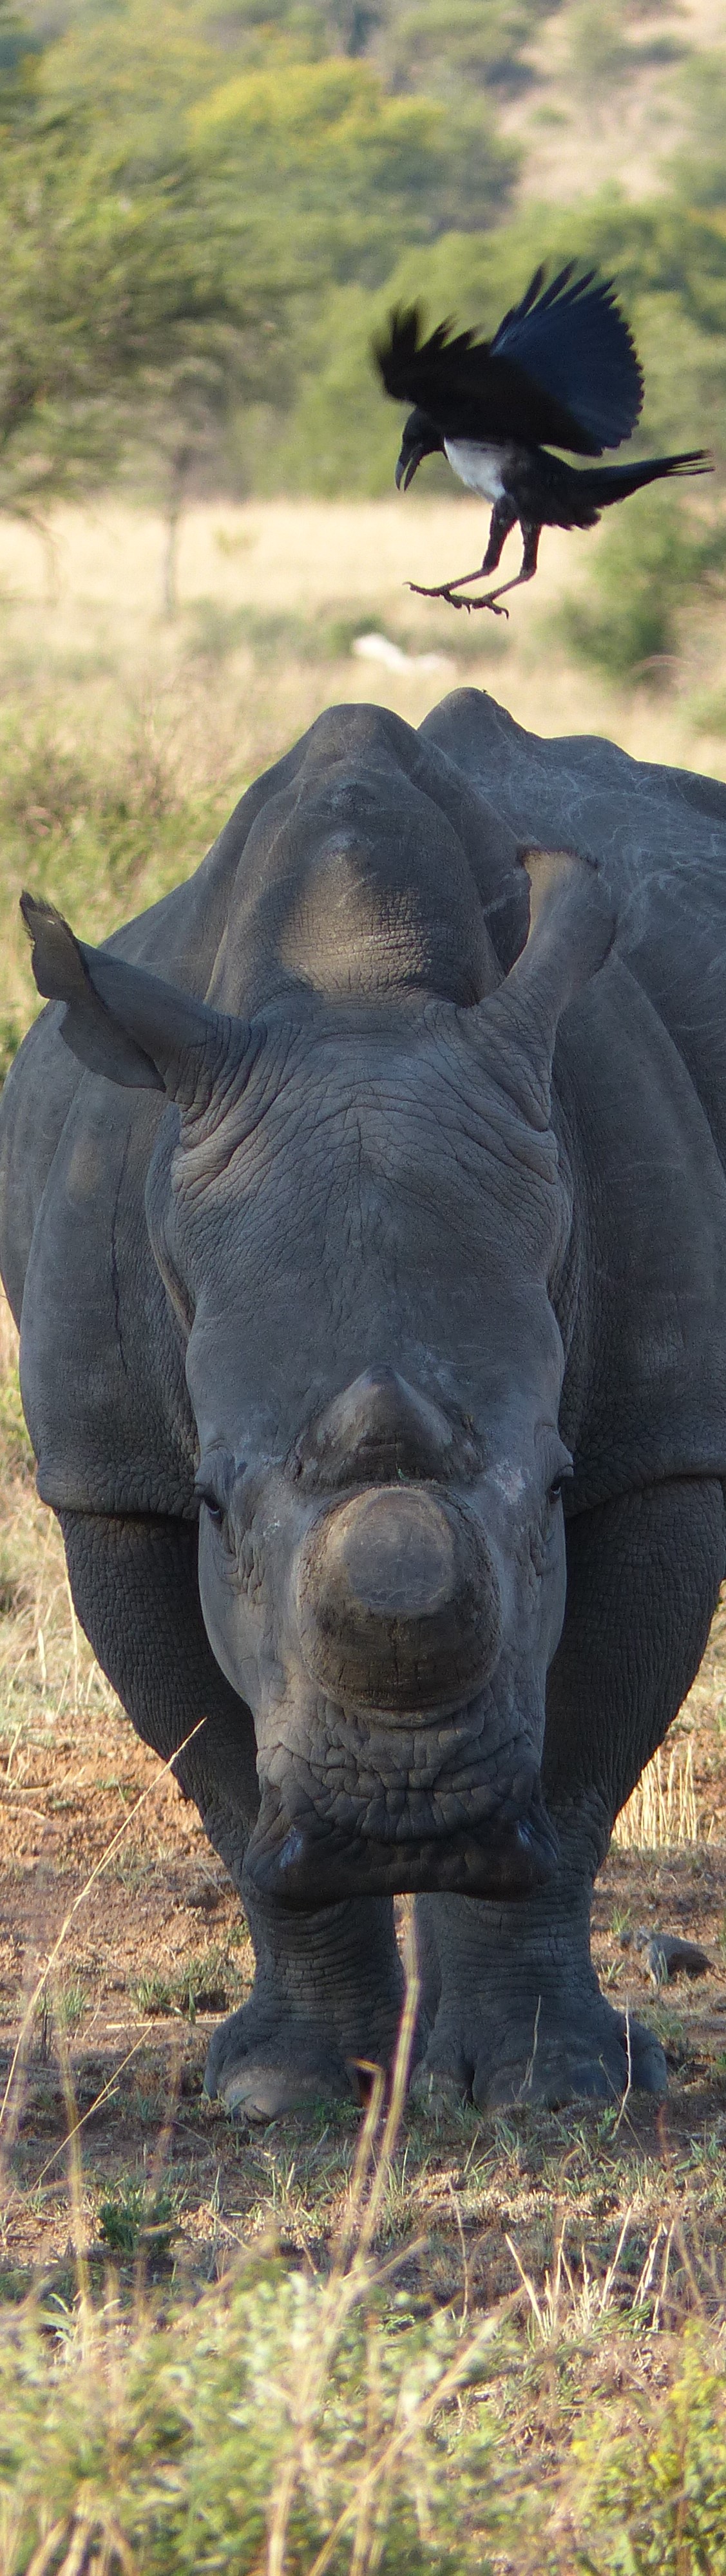 A rhino facing the camera while a bird lands on its back